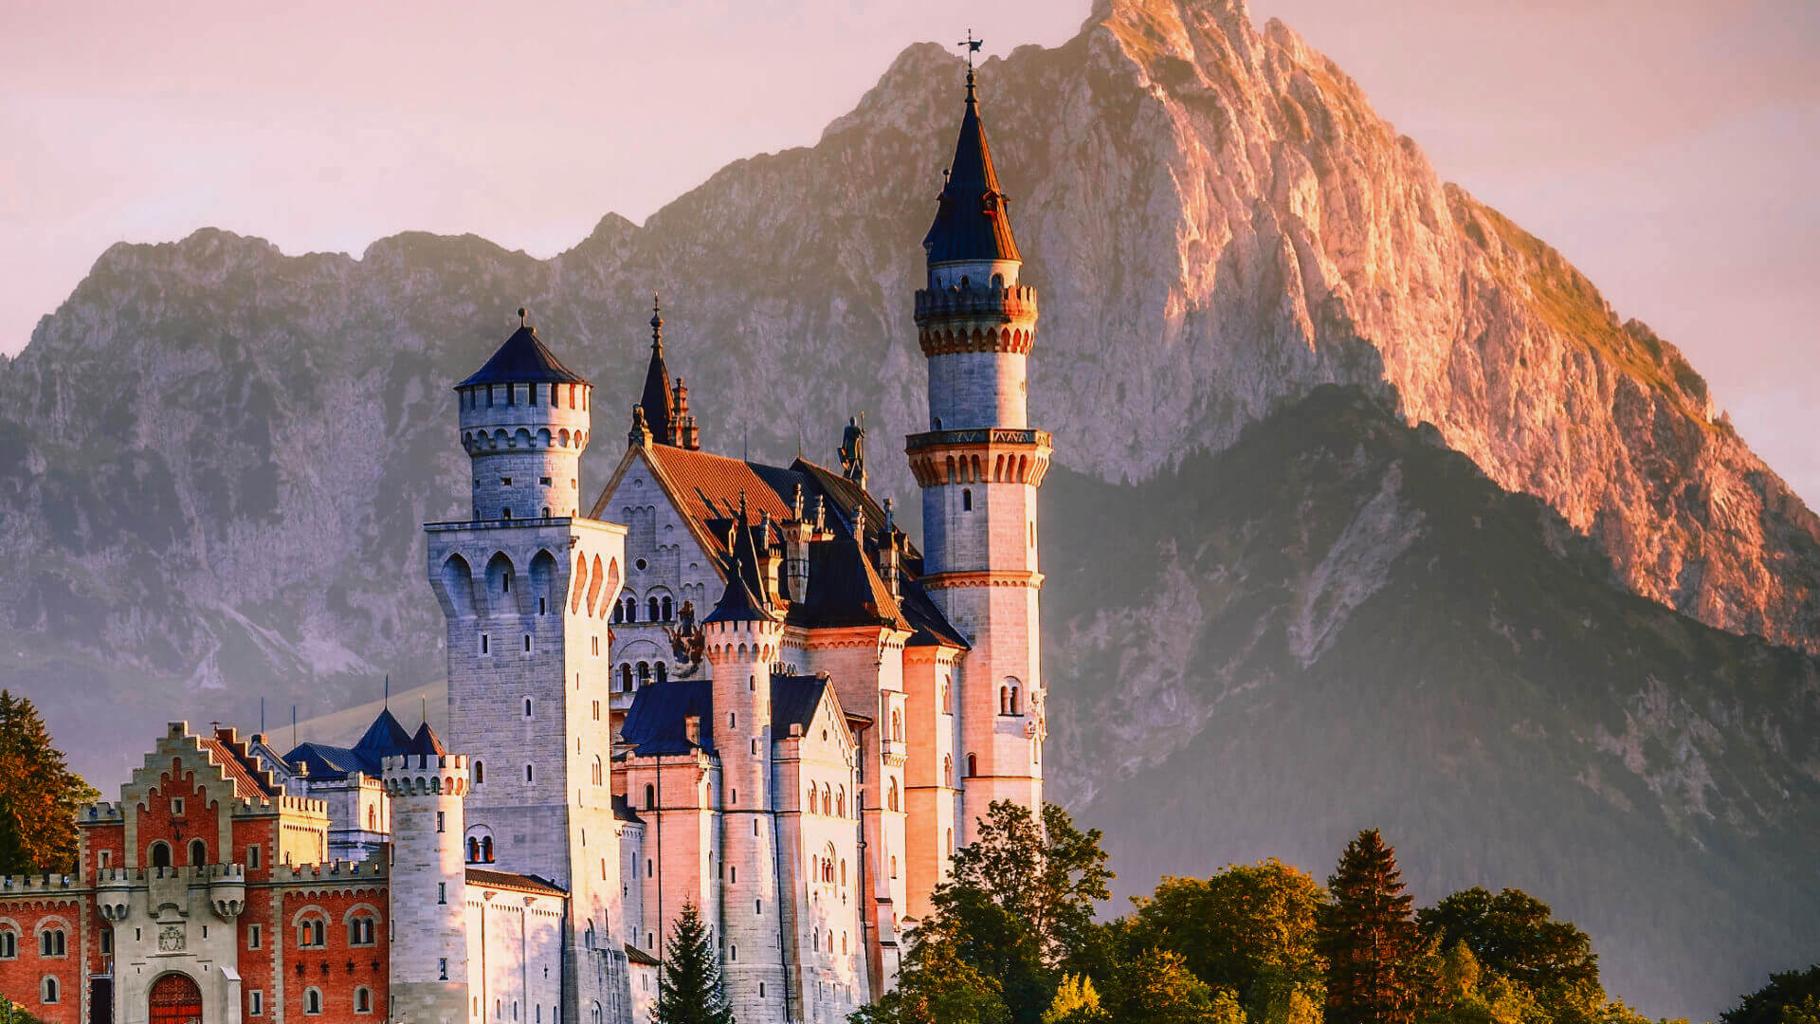 Scenic castle at dawn. Photo by Felix Mittermeier from Pexels (with contrast modifications).